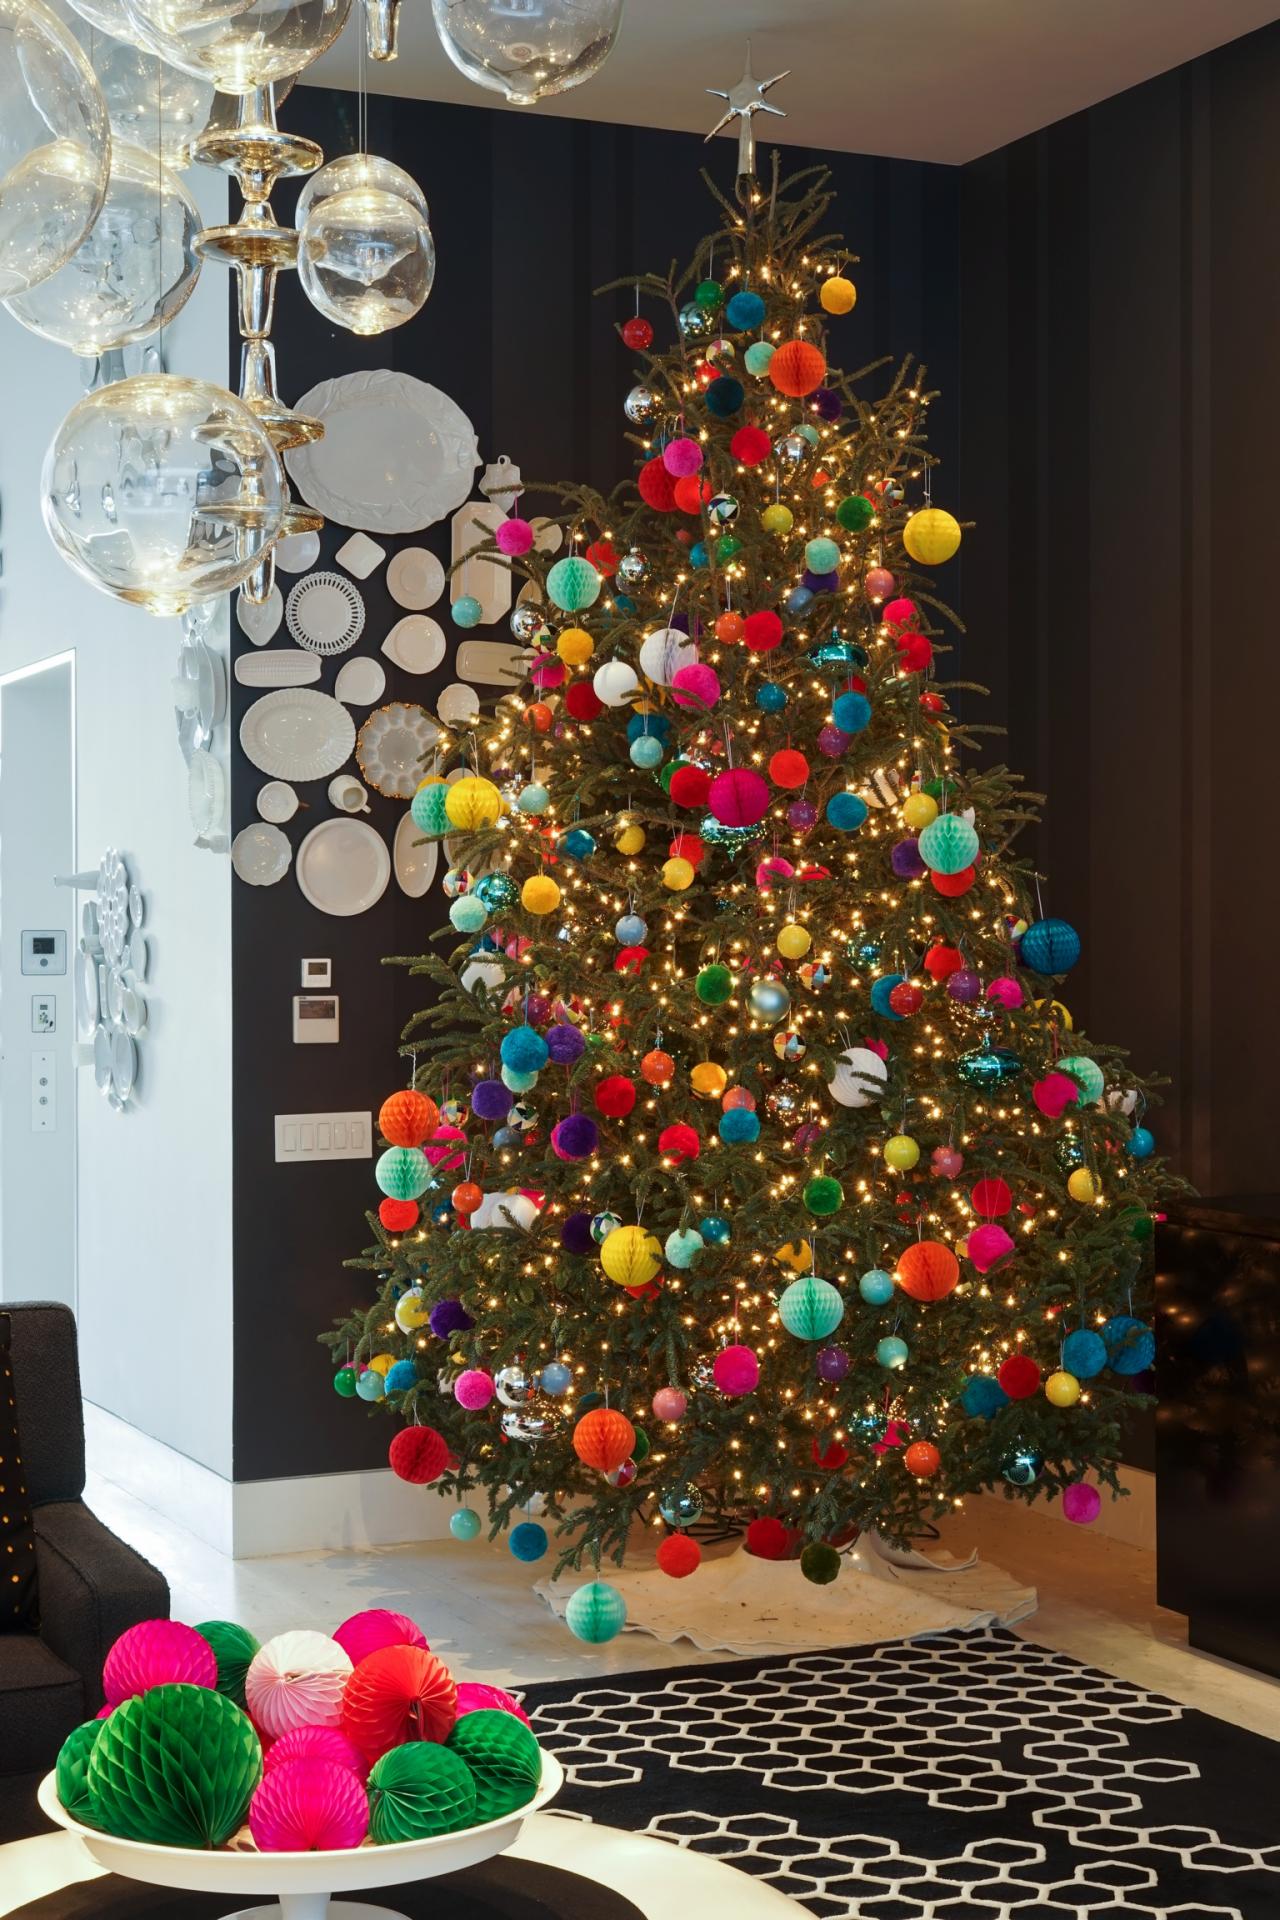 How to complete Christmas tree decoration: Some ideas to titivate Christmas tree